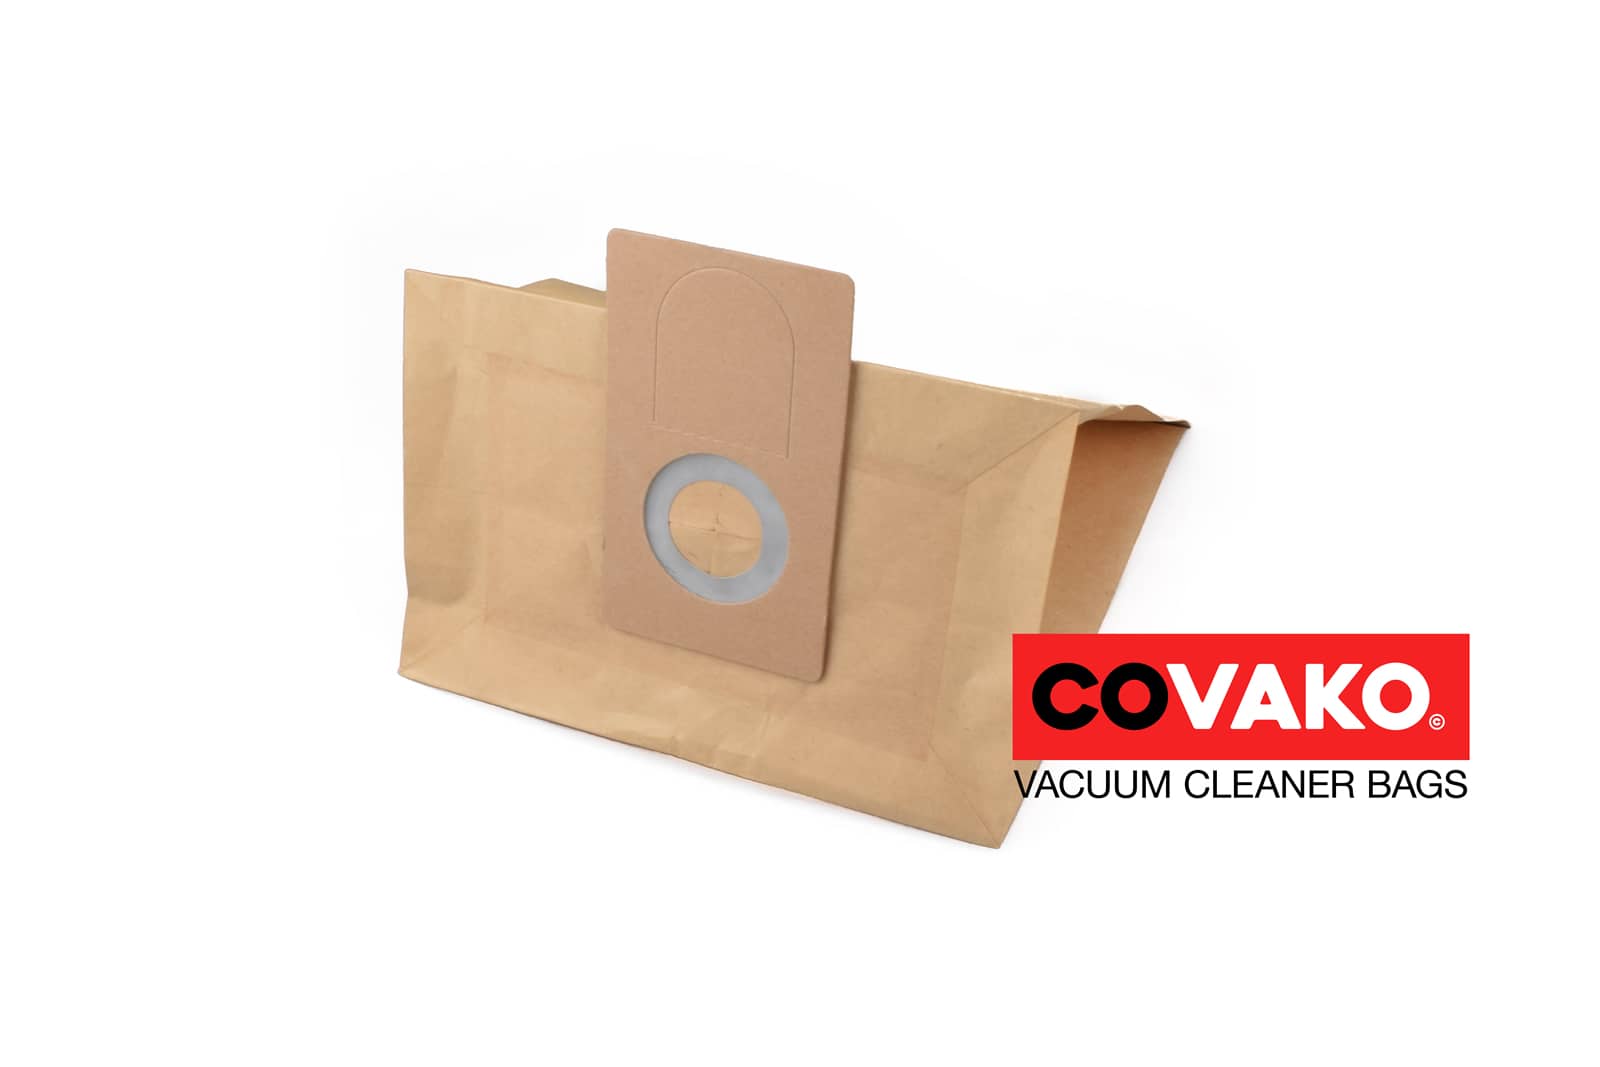 Fast S11 / Paper - Fast vacuum cleaner bags